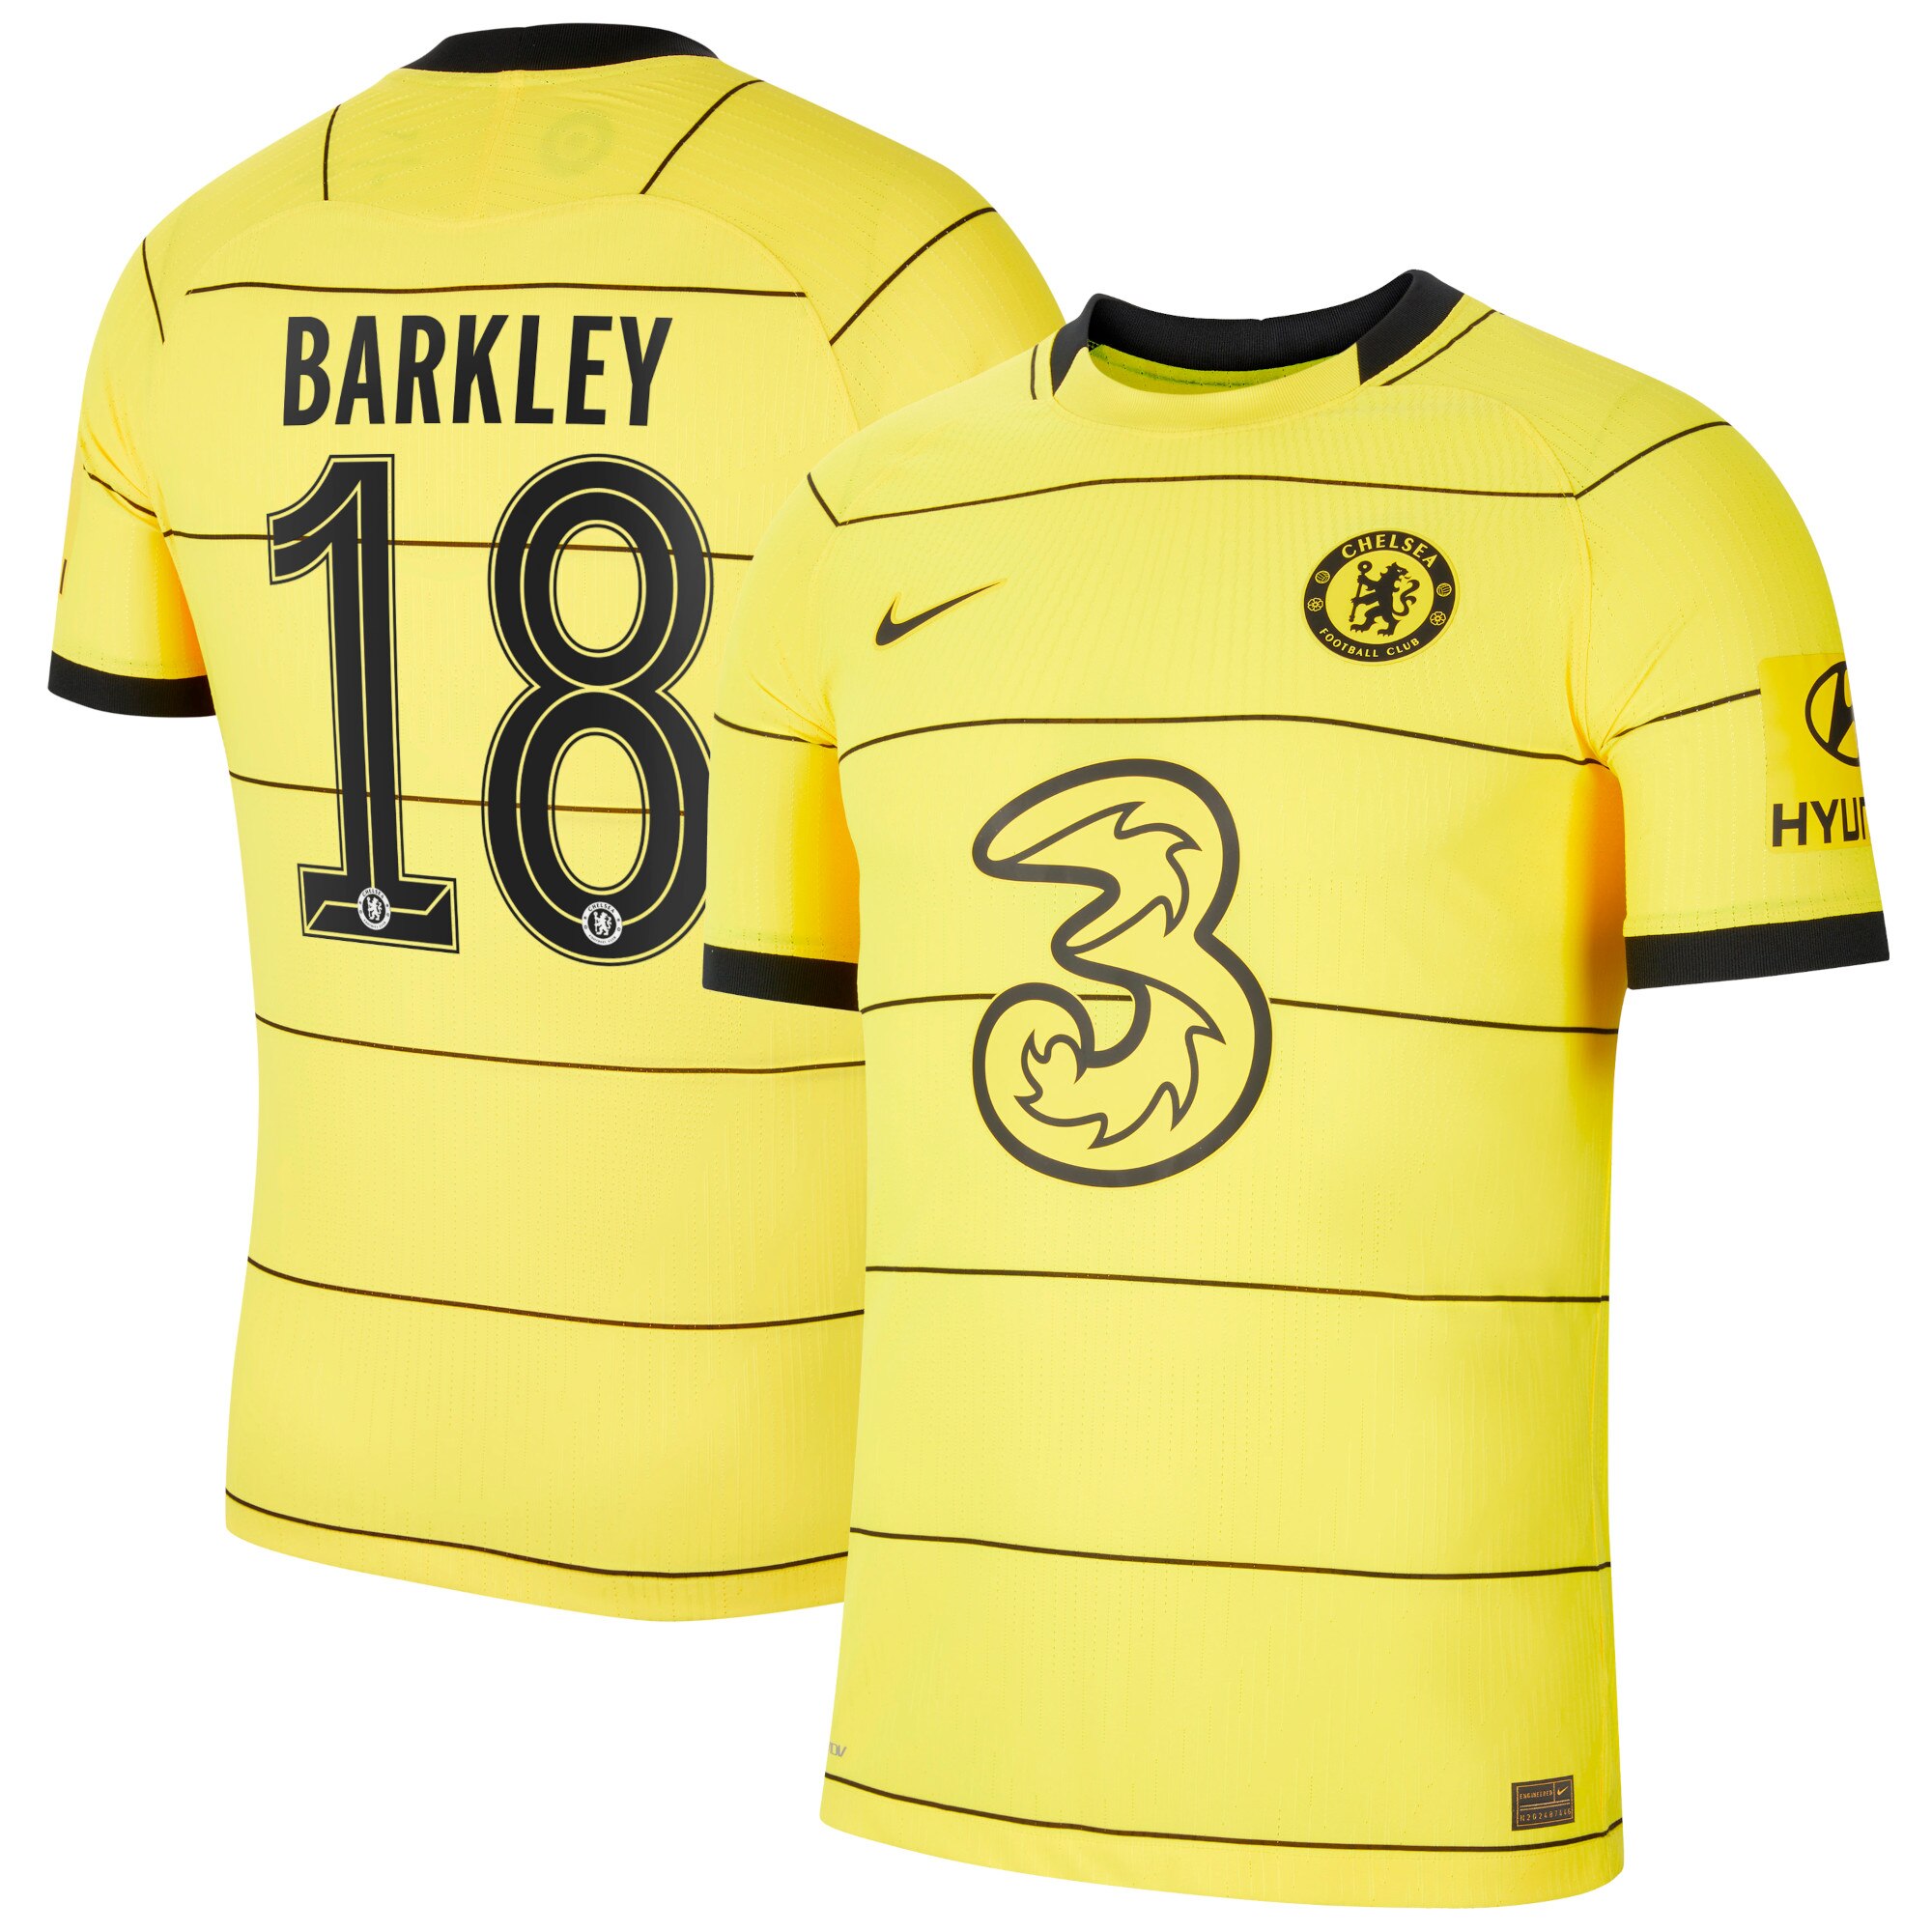 Chelsea Cup Away Vapor Match Shirt 2021-22 with Barkley 18 printing